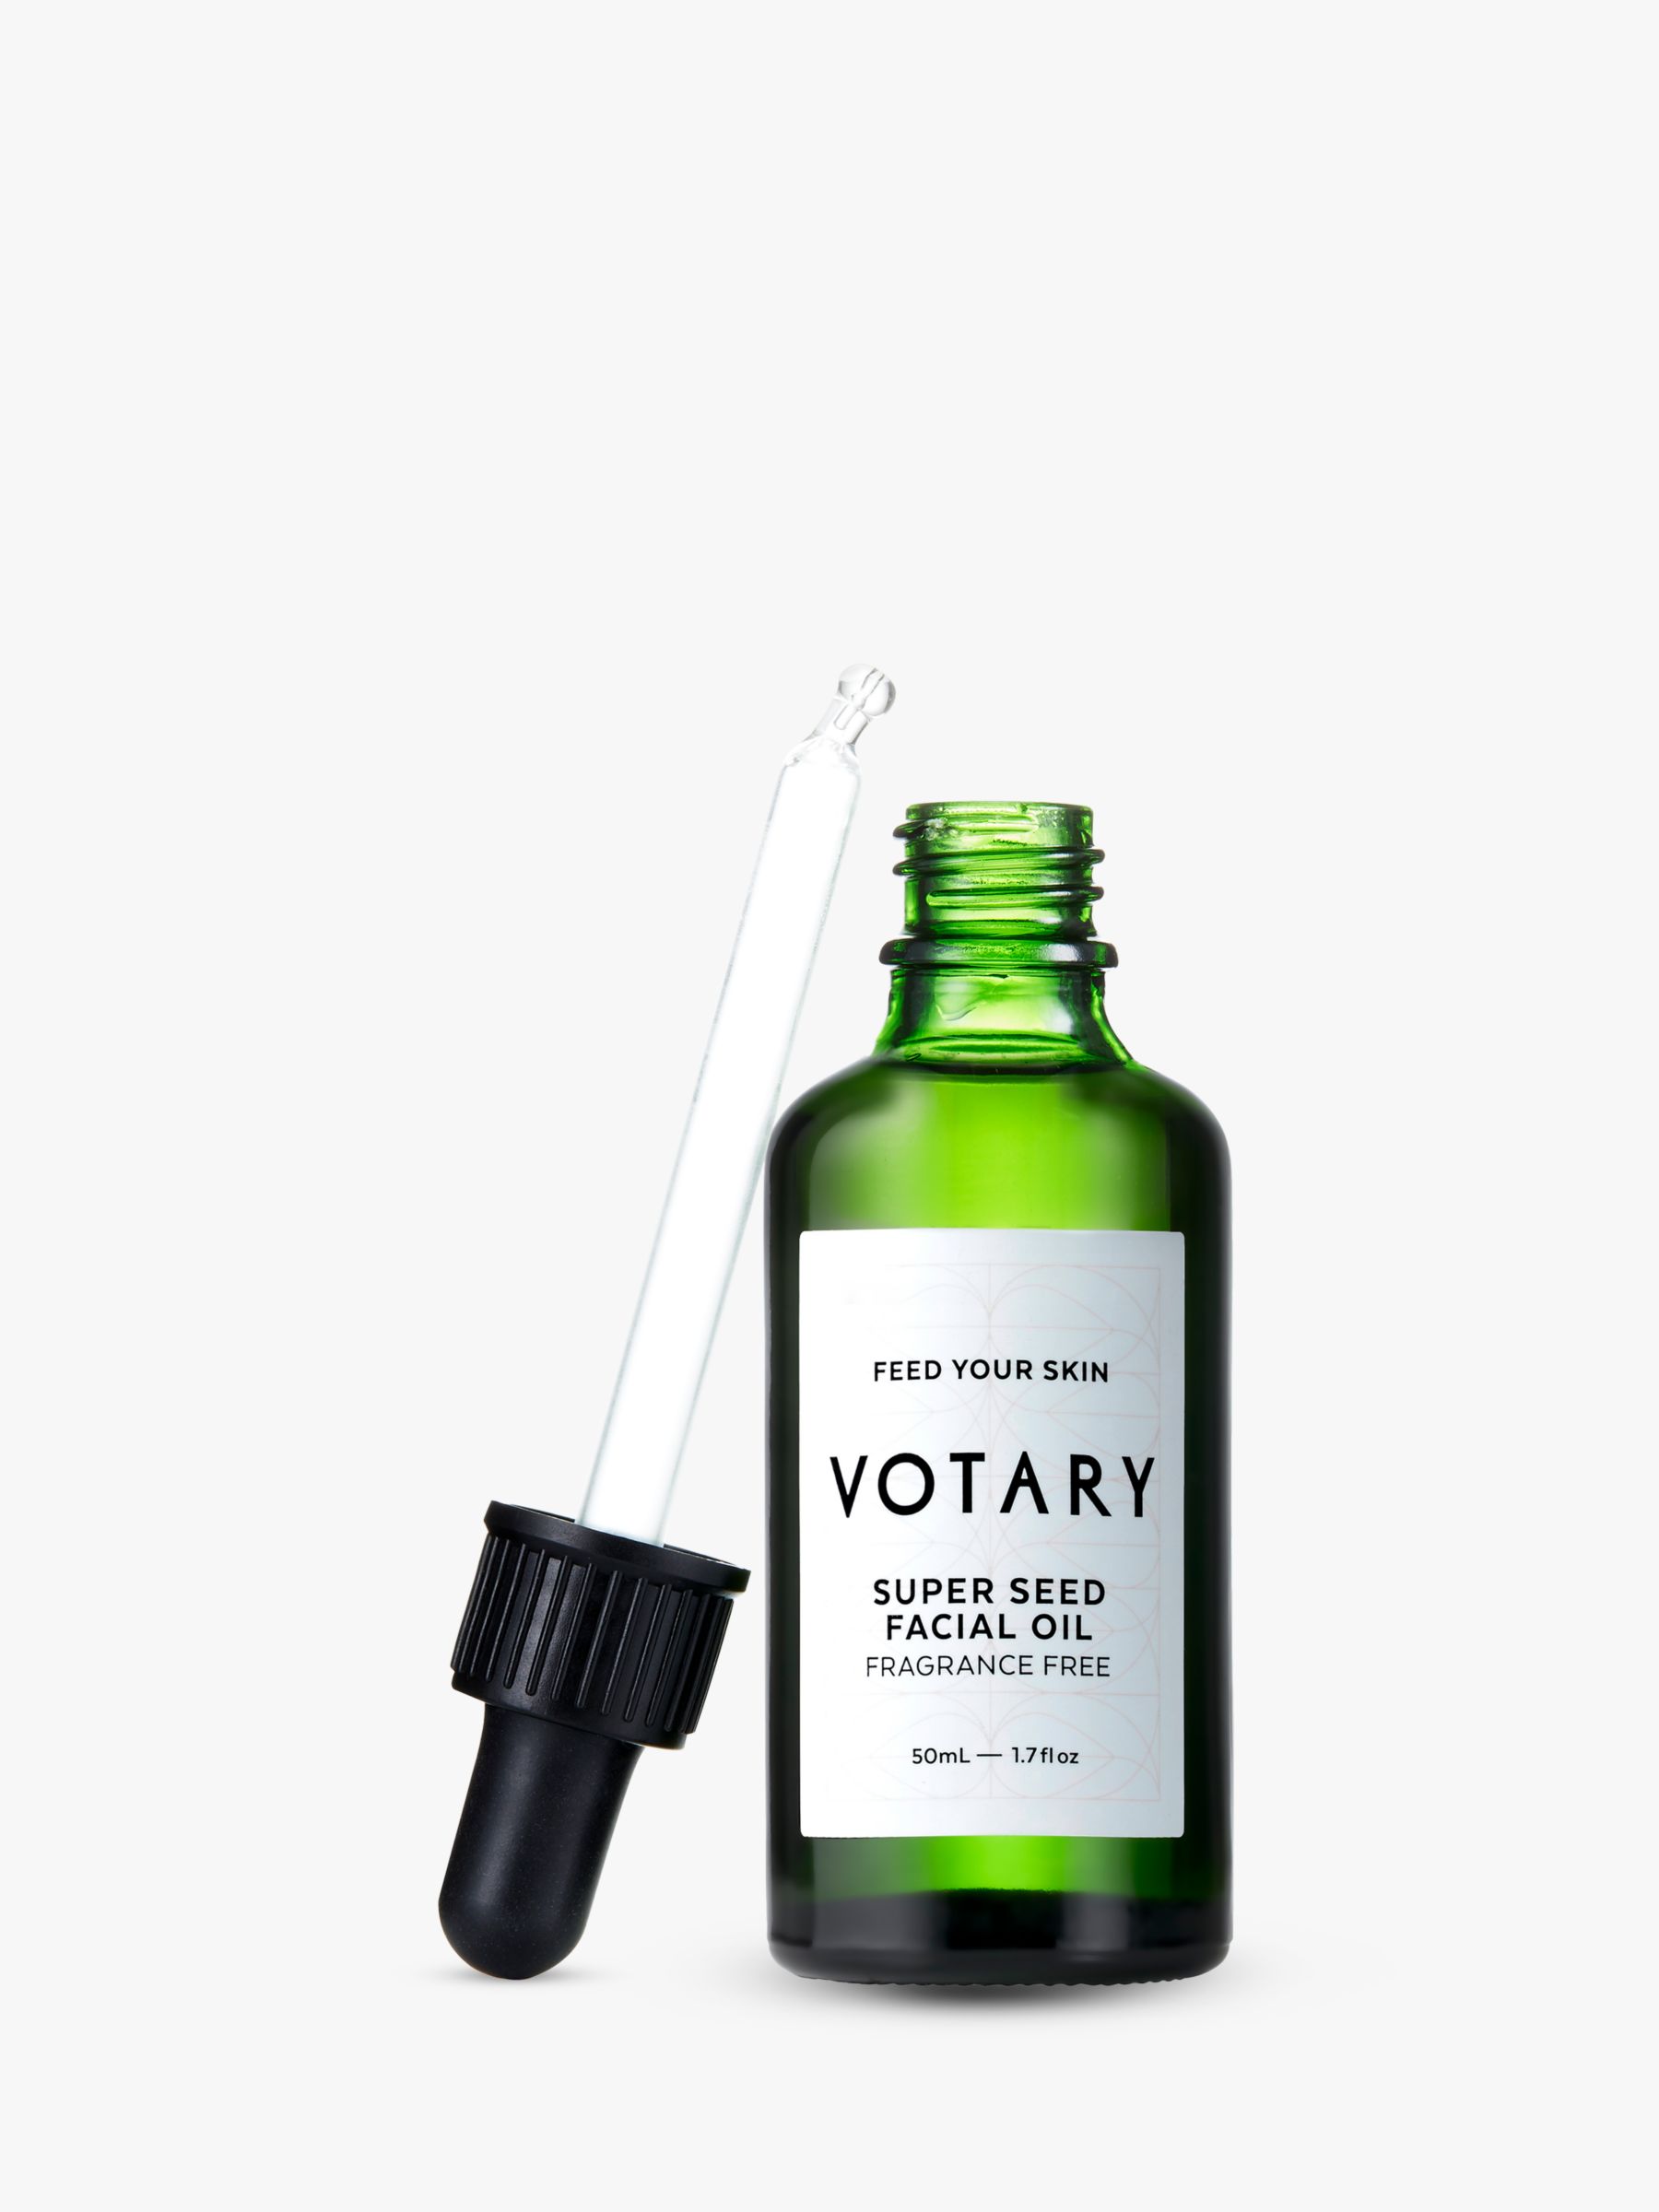 Votary Super Seed Facial Oil, Fragrance Free, 50ml 2